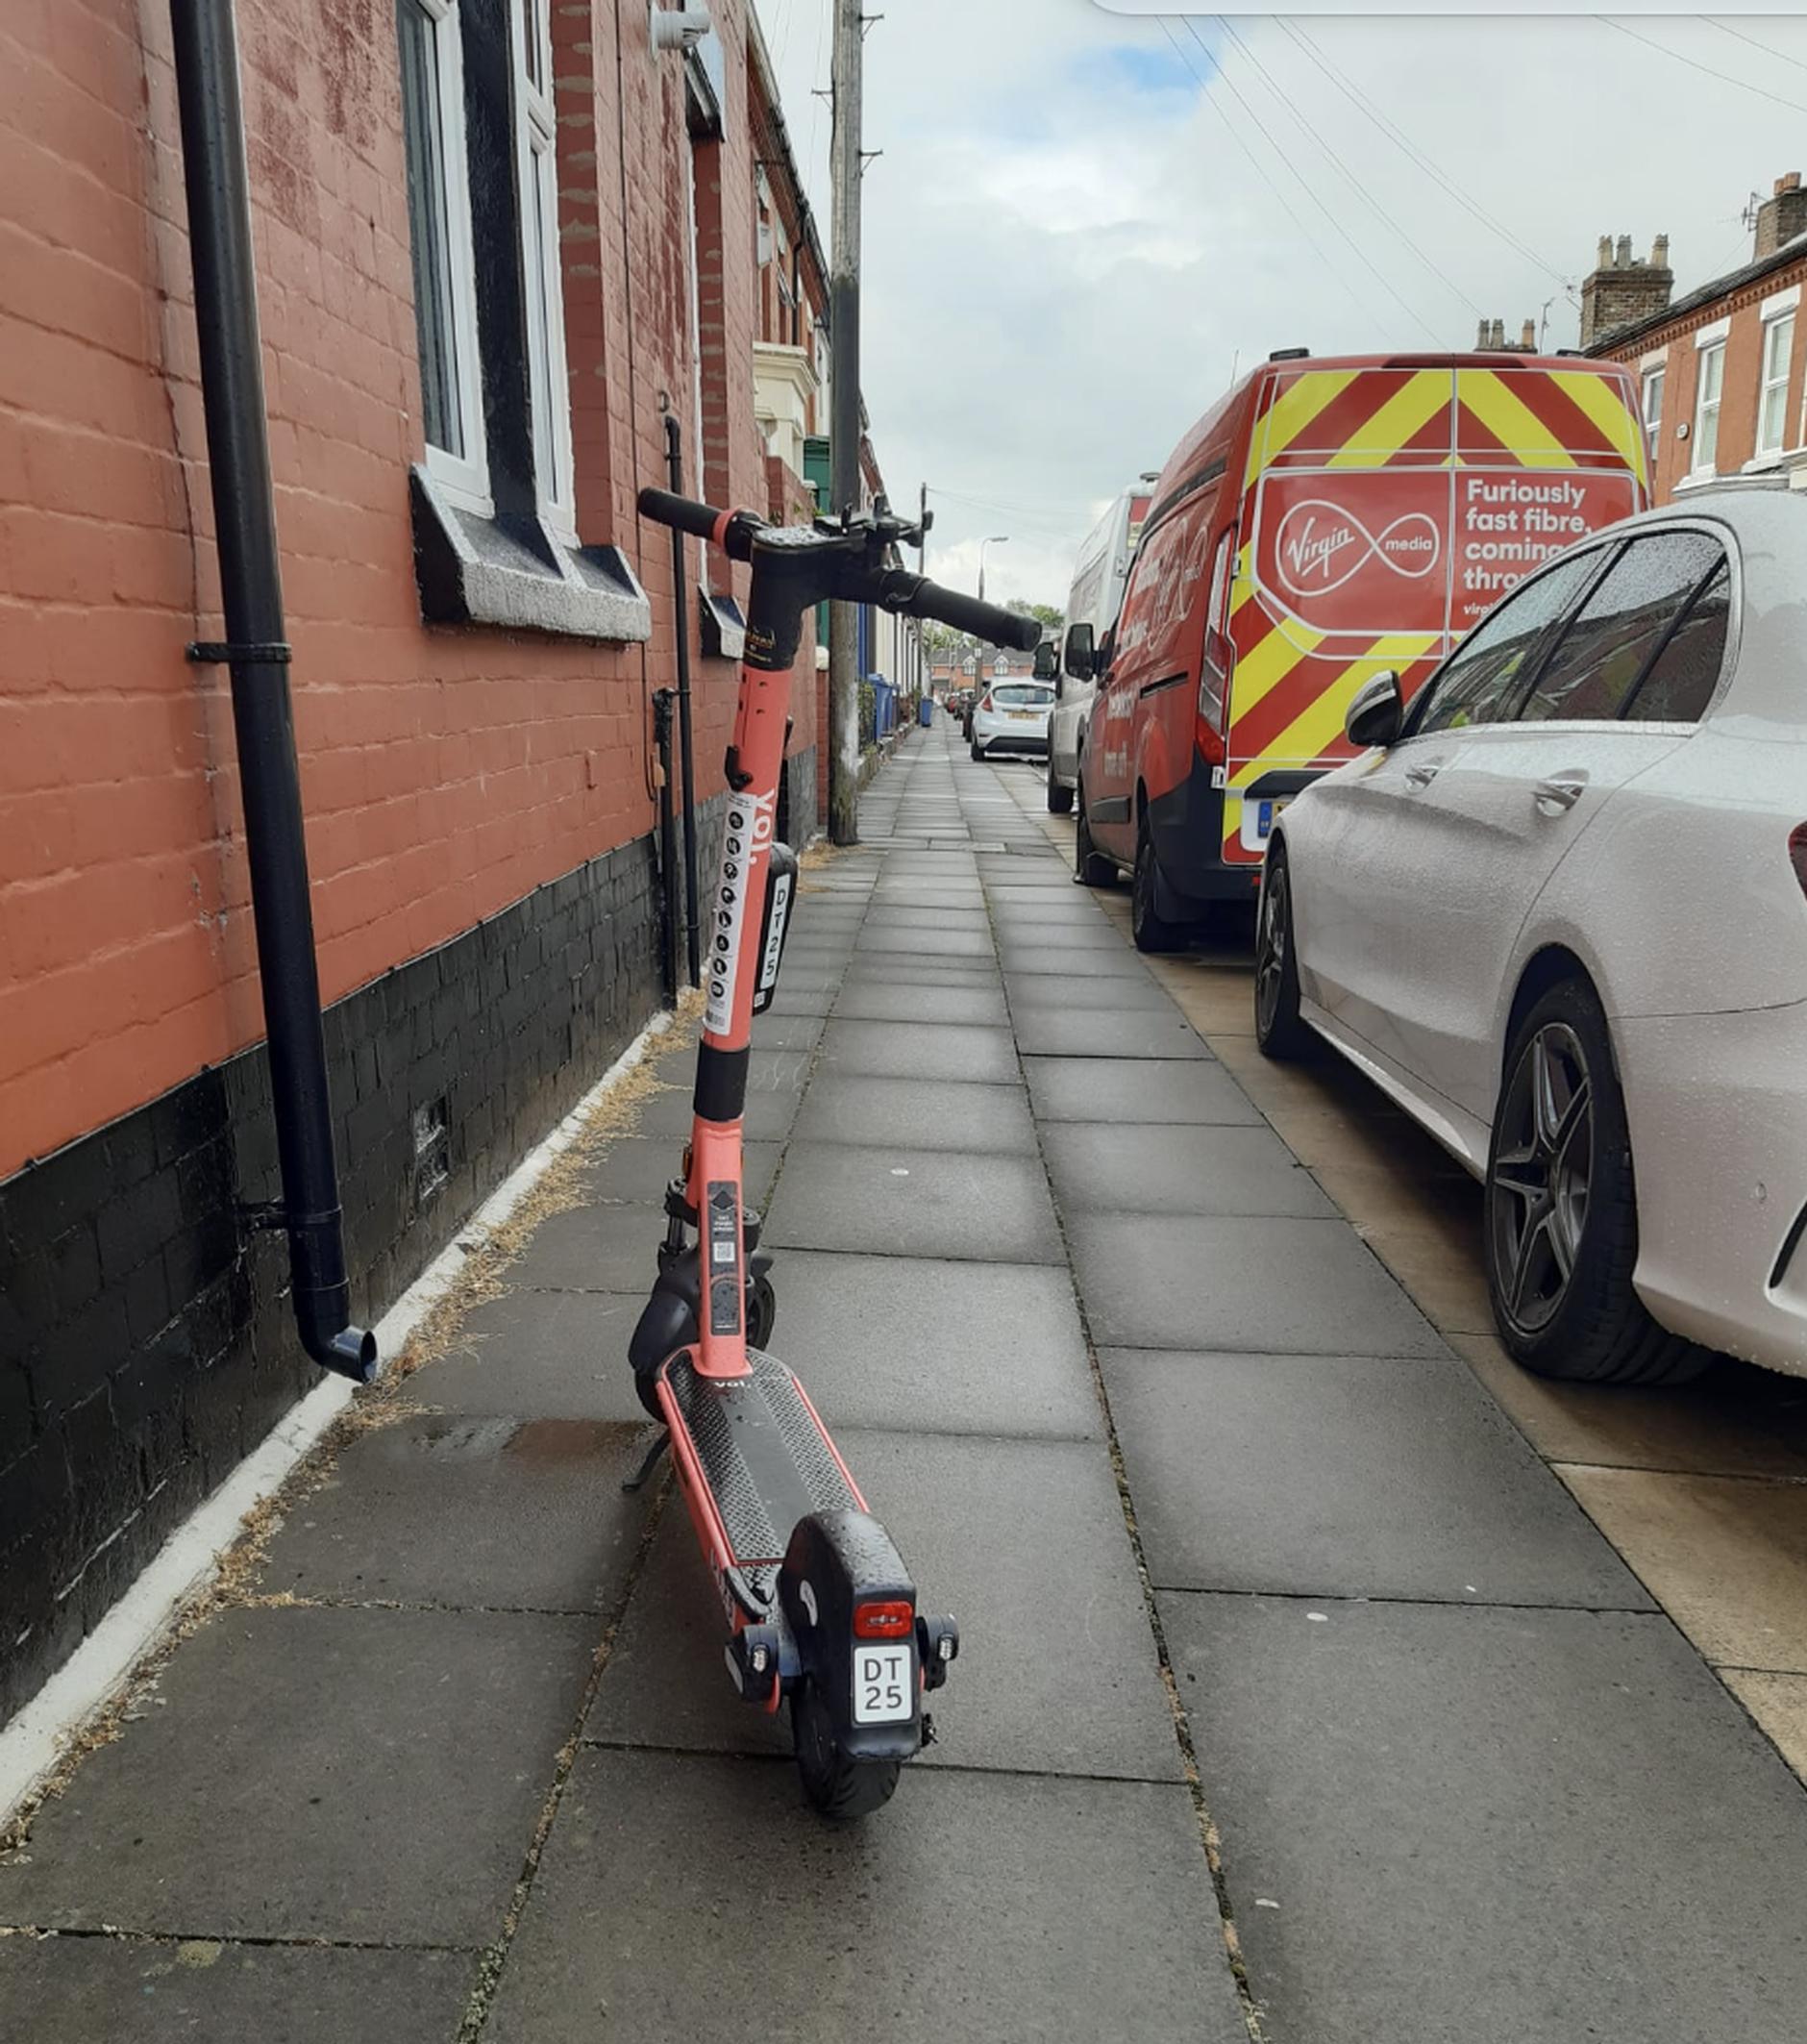 Poorly parked rental scooters are a hazard